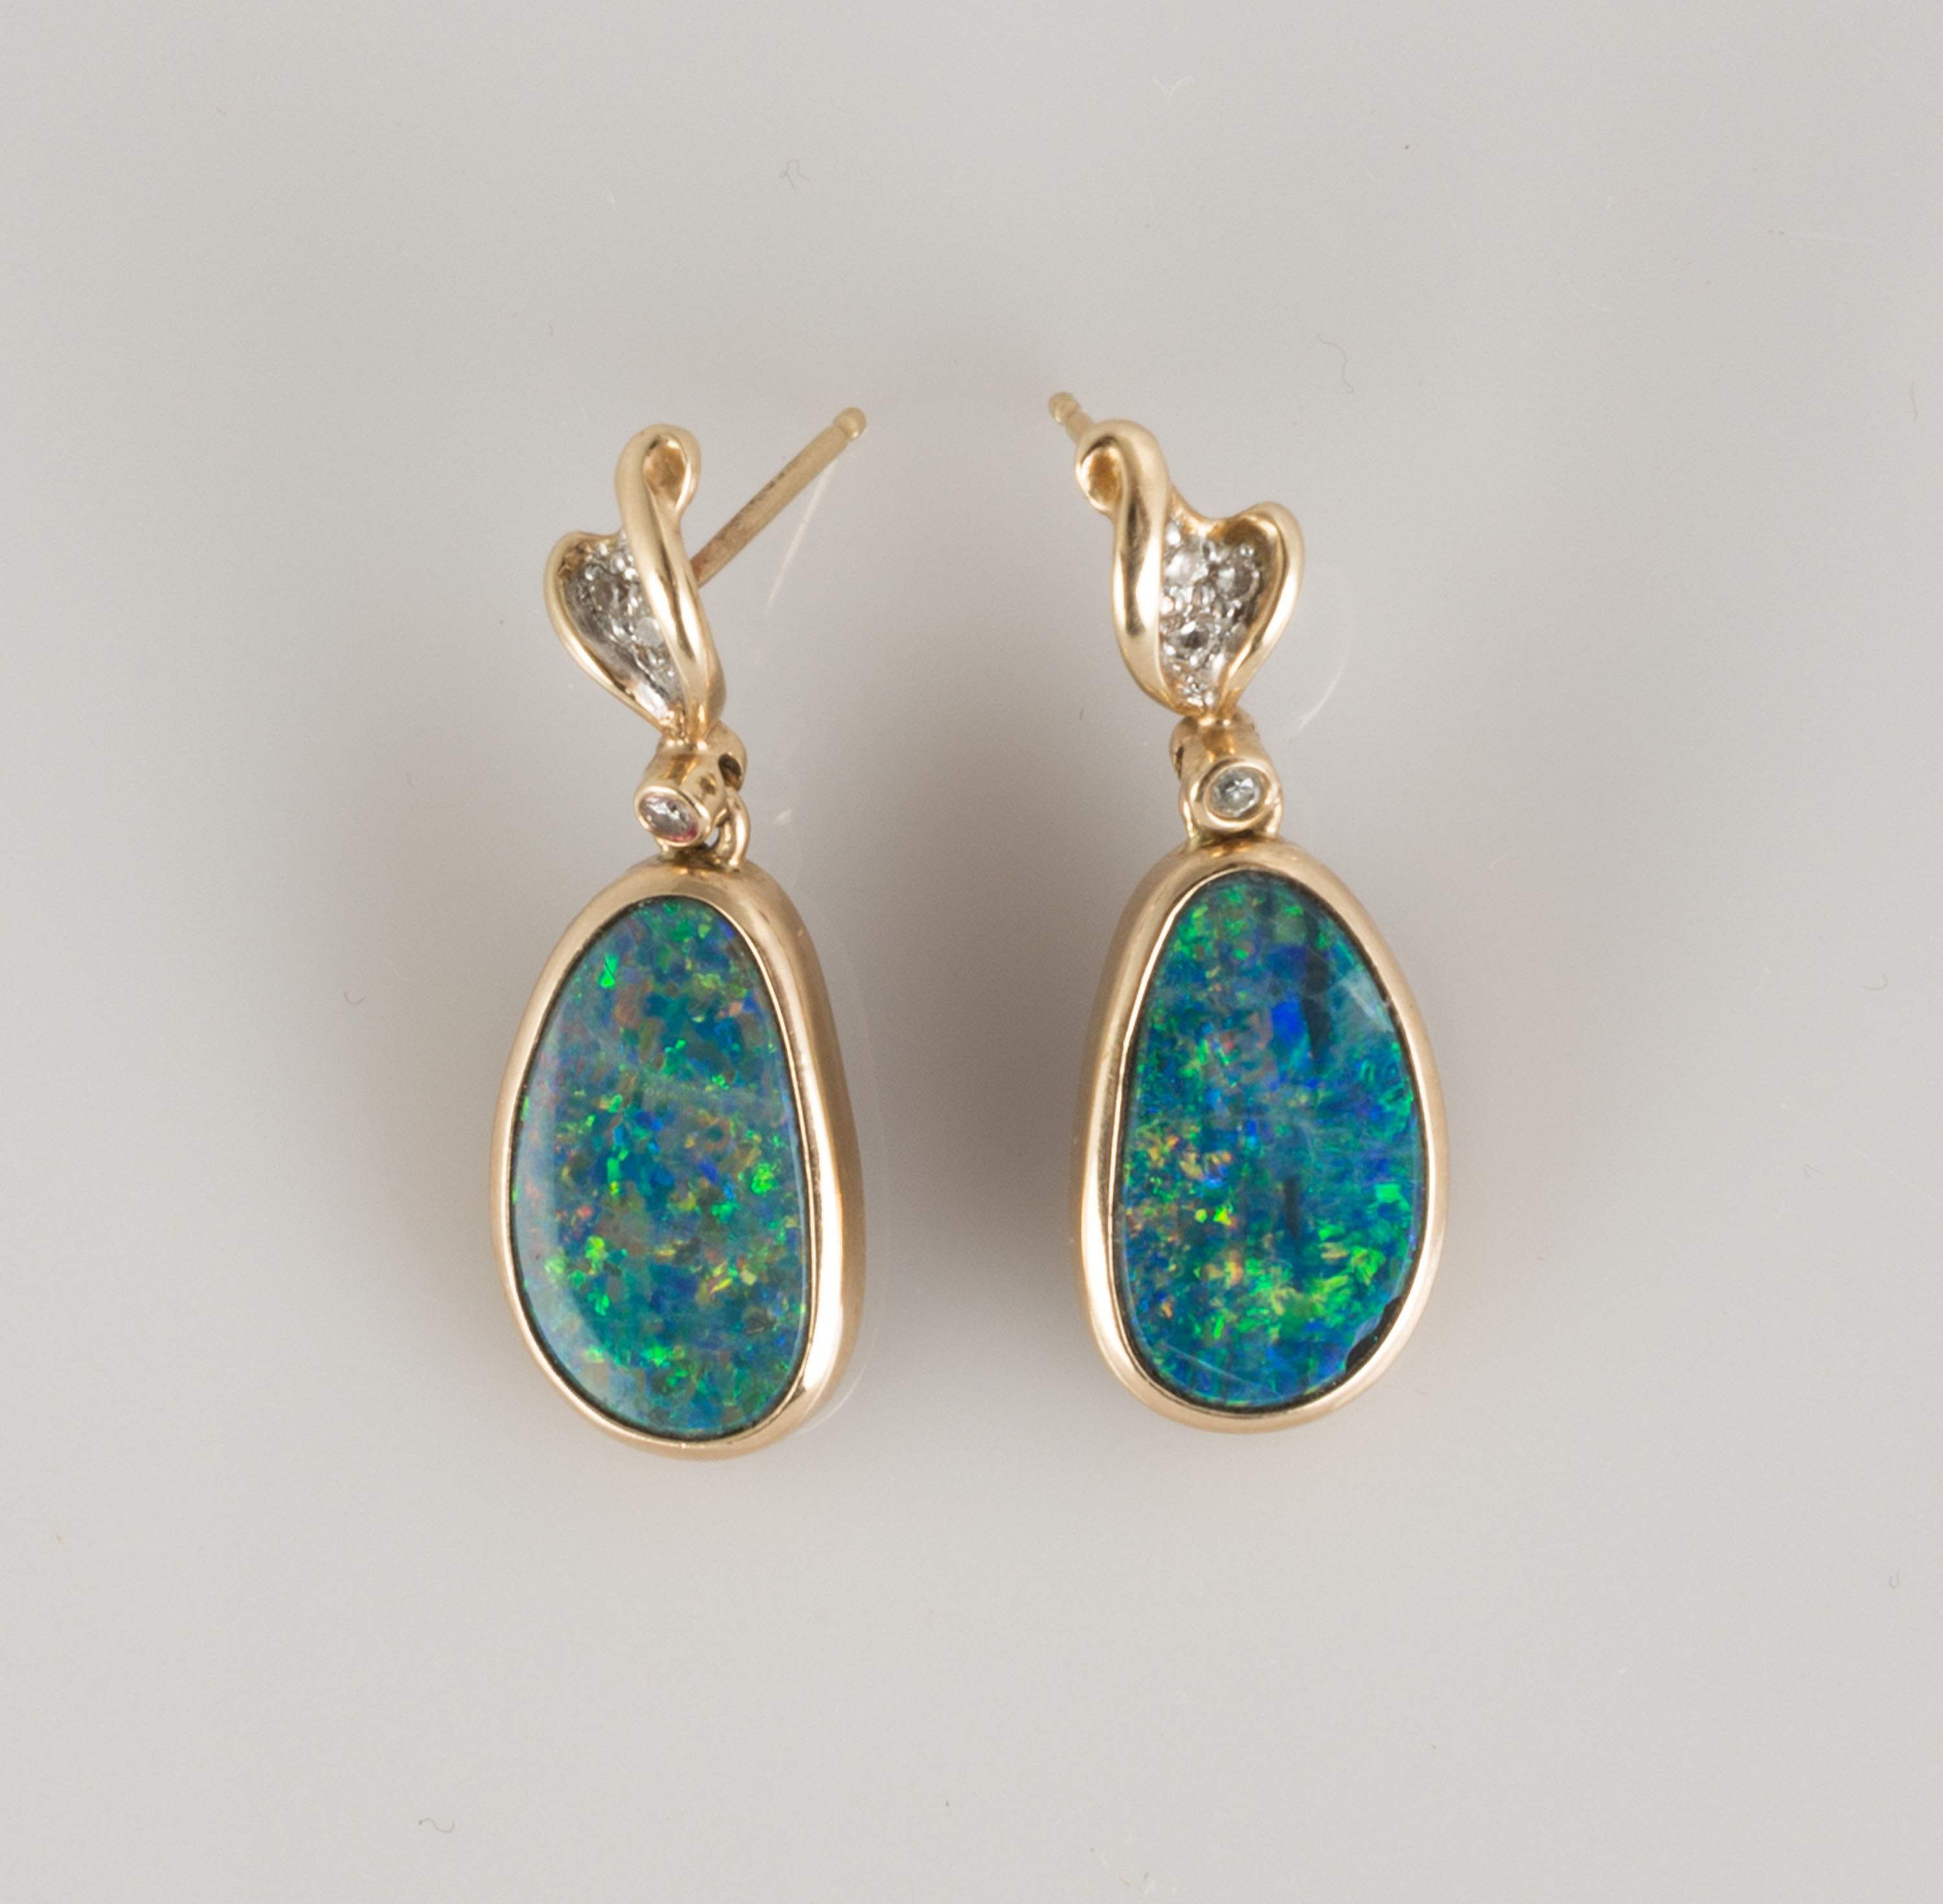 Pair of 14K Gold, Opal and Diamond Drop Earrings | Cottone Auctions